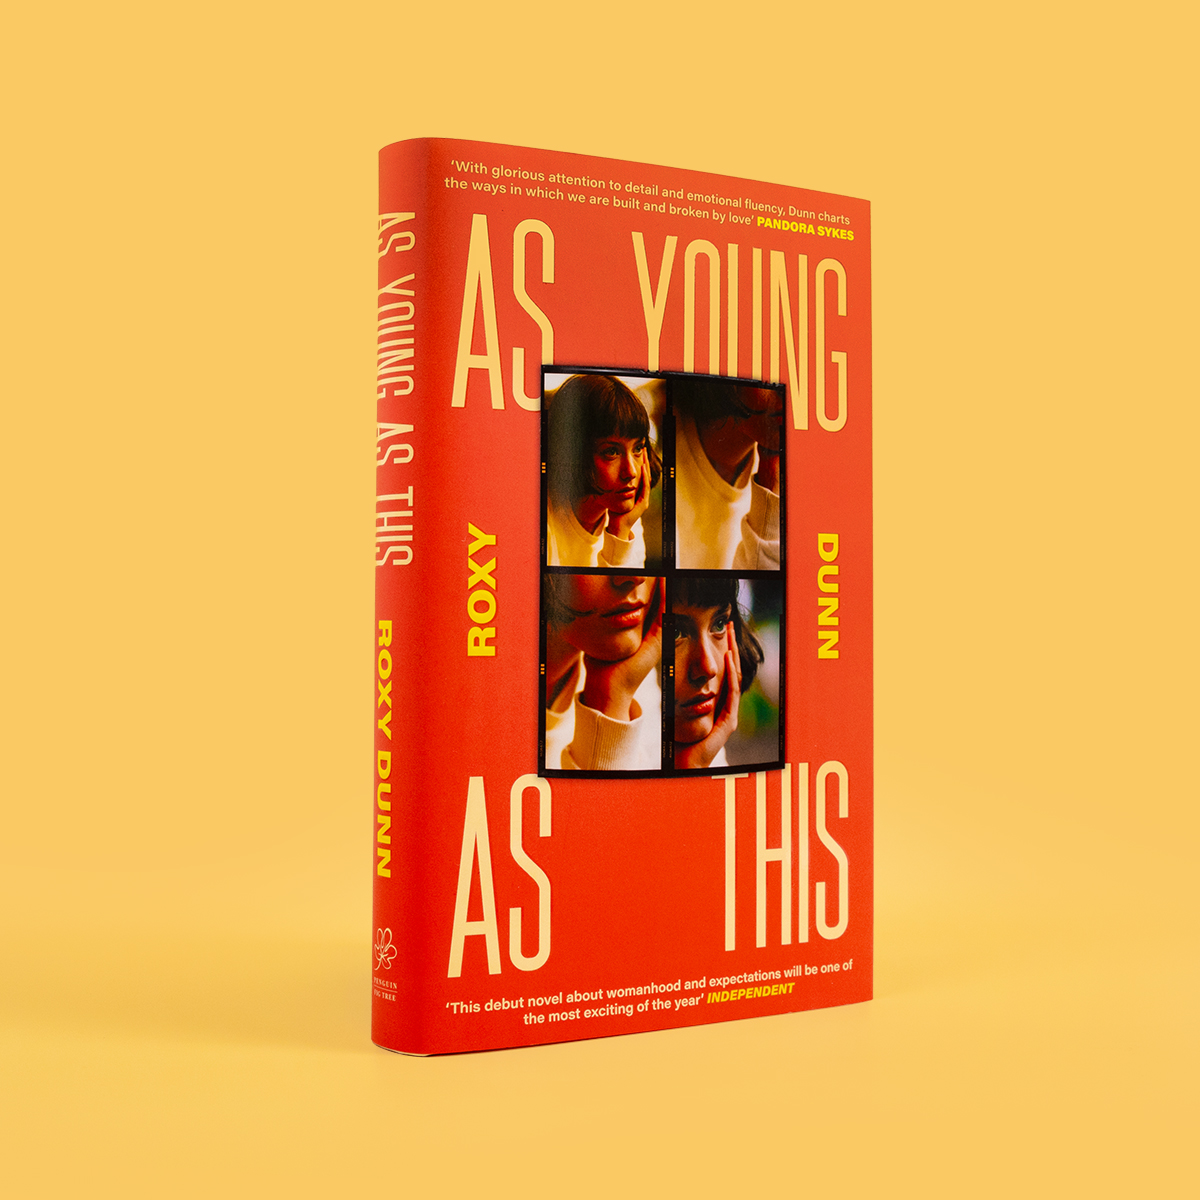 'The perfect read for fans of Dolly Alderton or David Nicholls’ One Day' A wonderful review of #AsYoungAsThis by @RoxanaDunn in @Culturefly! culturefly.co.uk/spring-reads-1…